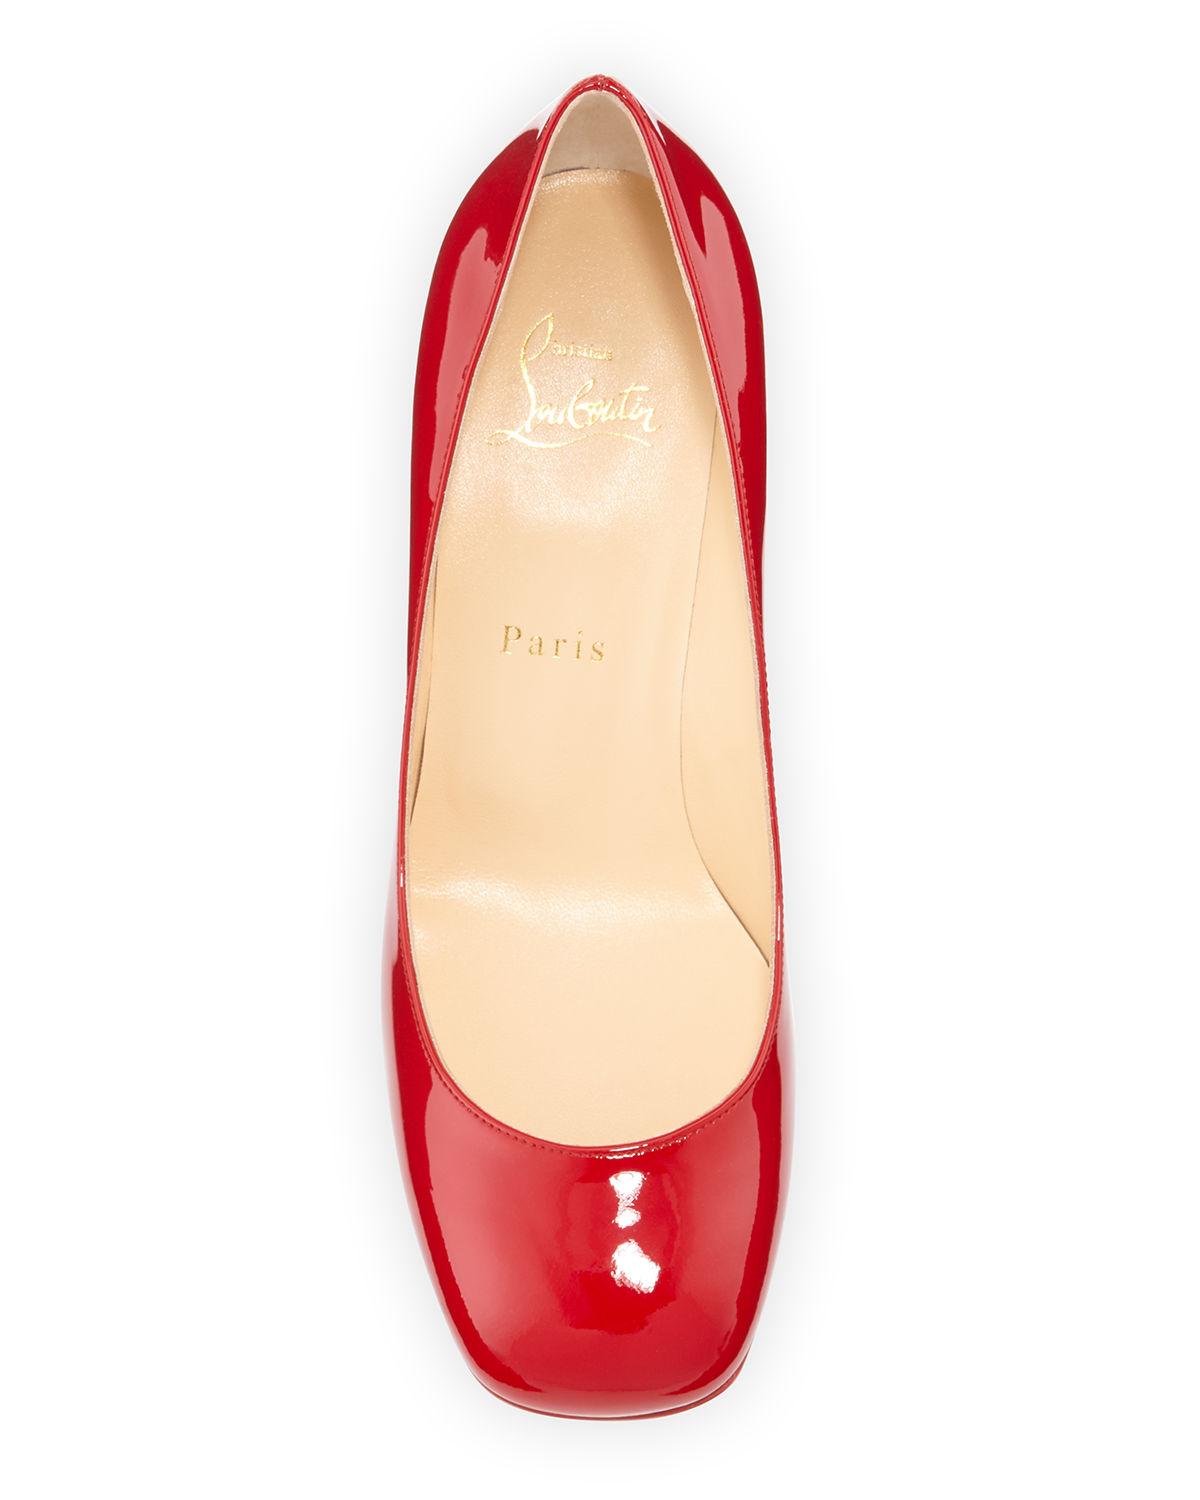 Christian Louboutin Leather Cadrilla Patent Block-heel Red Sole Pump - Lyst